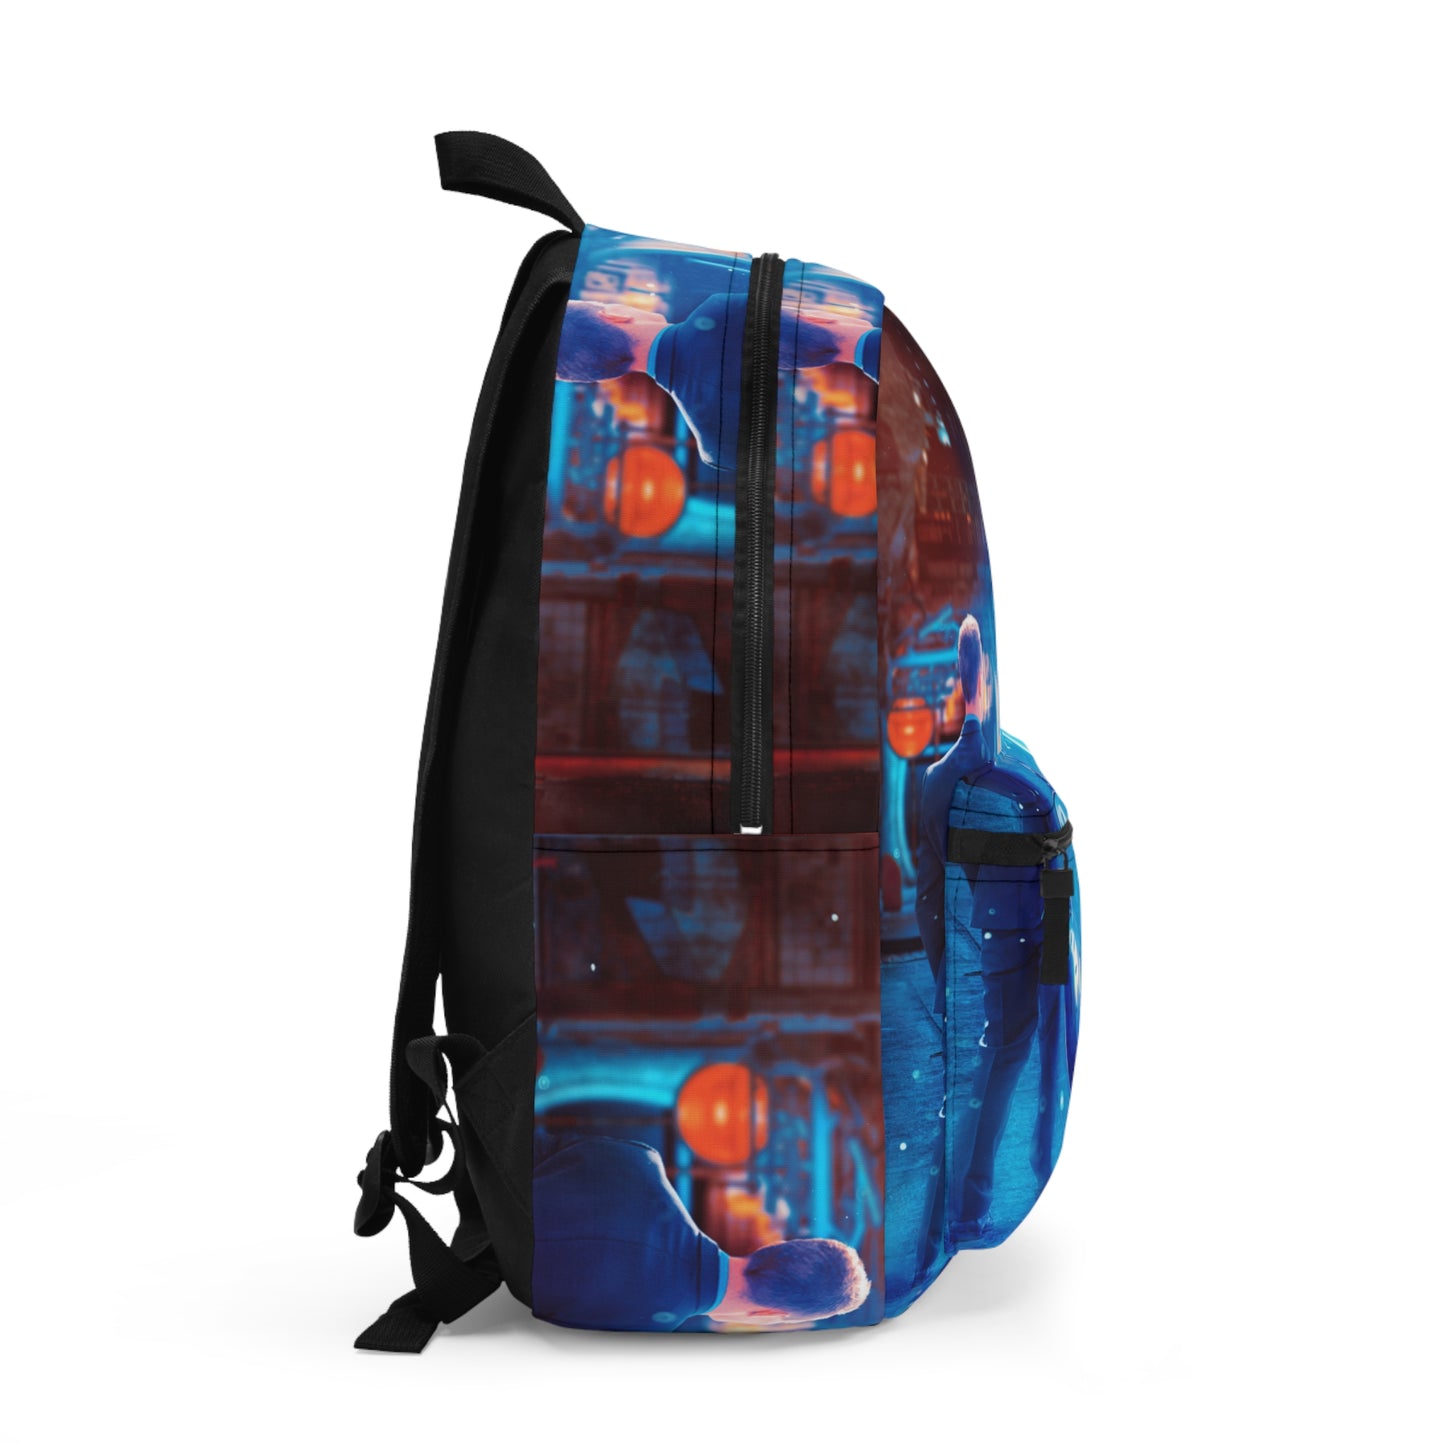 Time travel Backpack